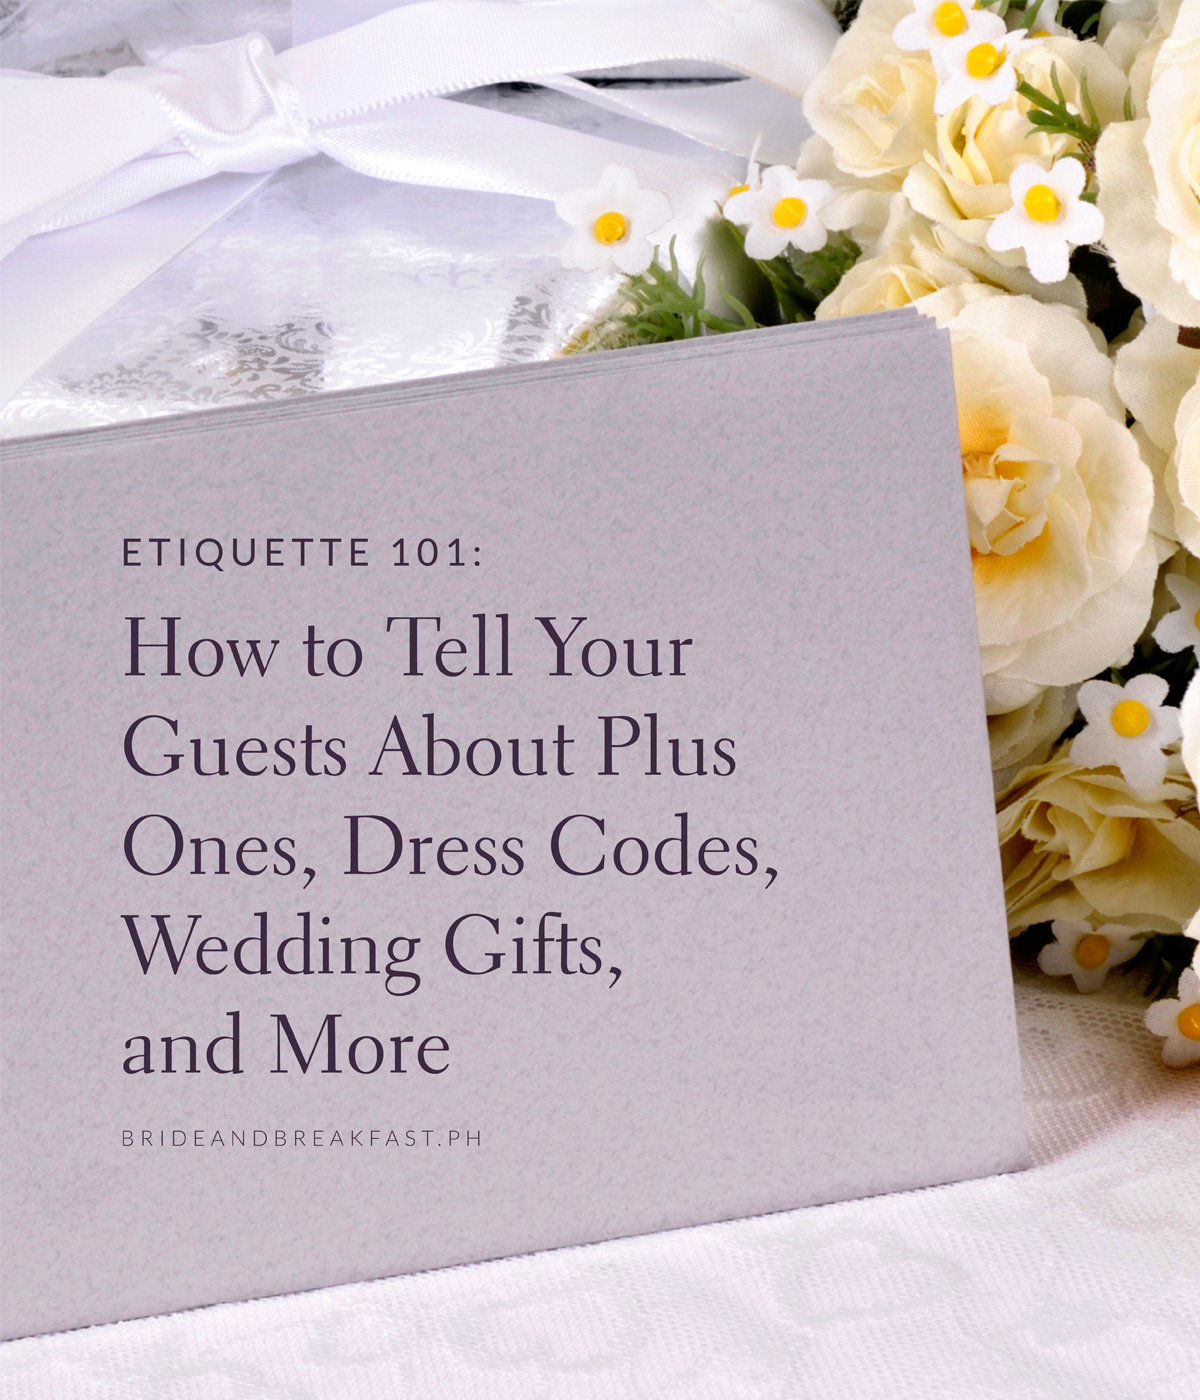 Etiquette 101: How to Tell Your Guests About Plus Ones, Dress Codes, Wedding Gifts, and More